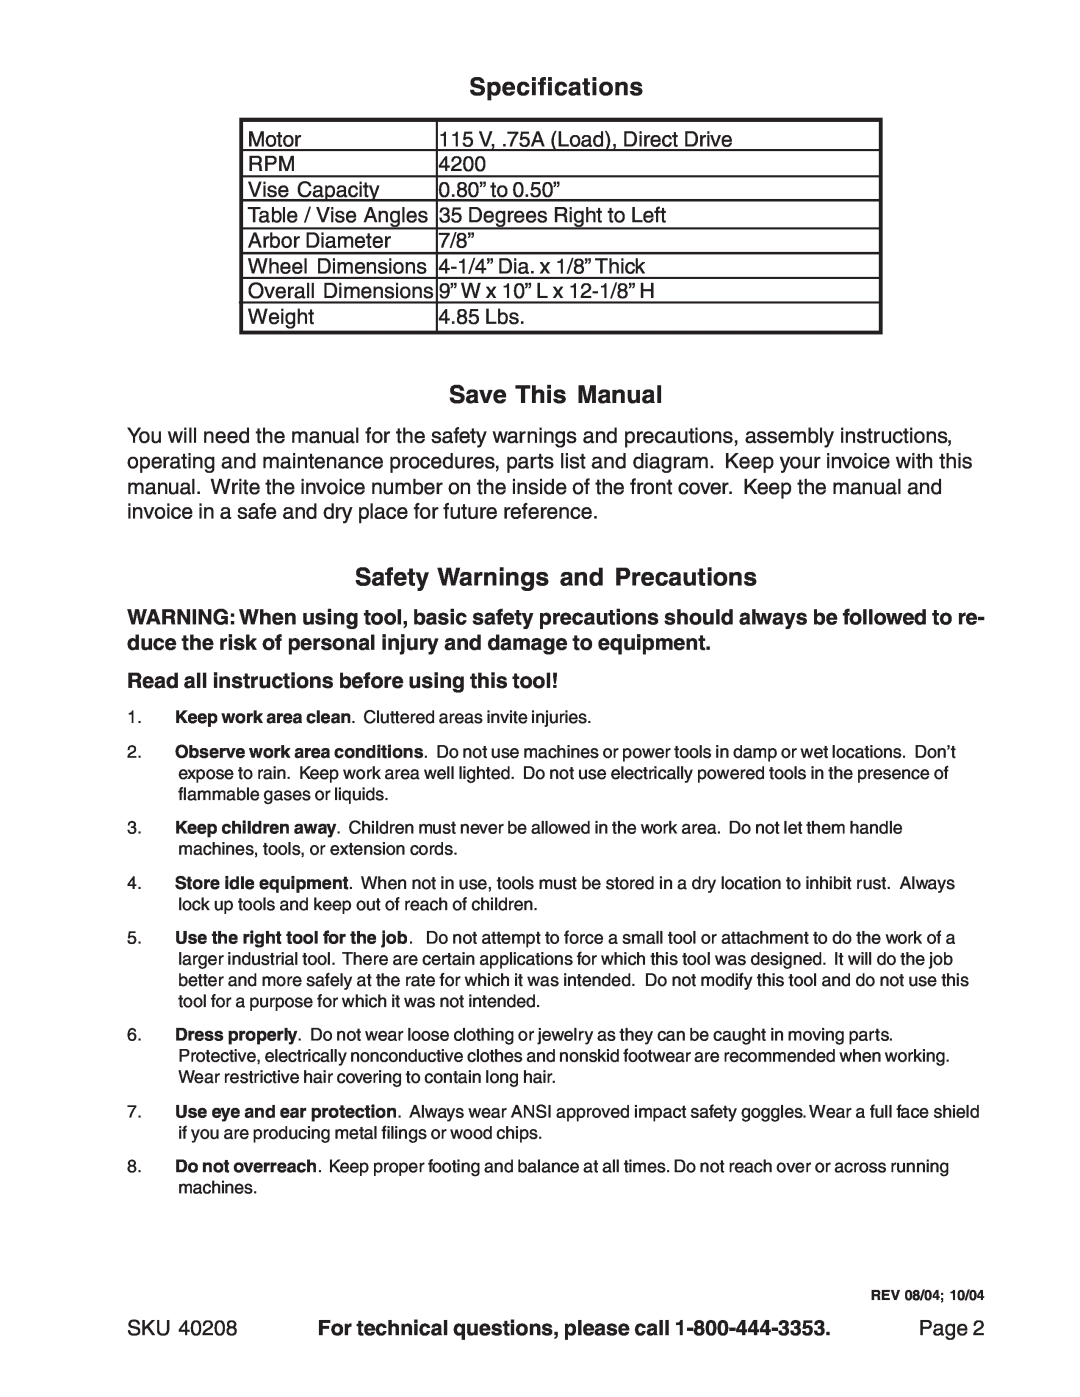 Harbor Freight Tools 40208 manual Specifications, Save This Manual, Safety Warnings and Precautions 